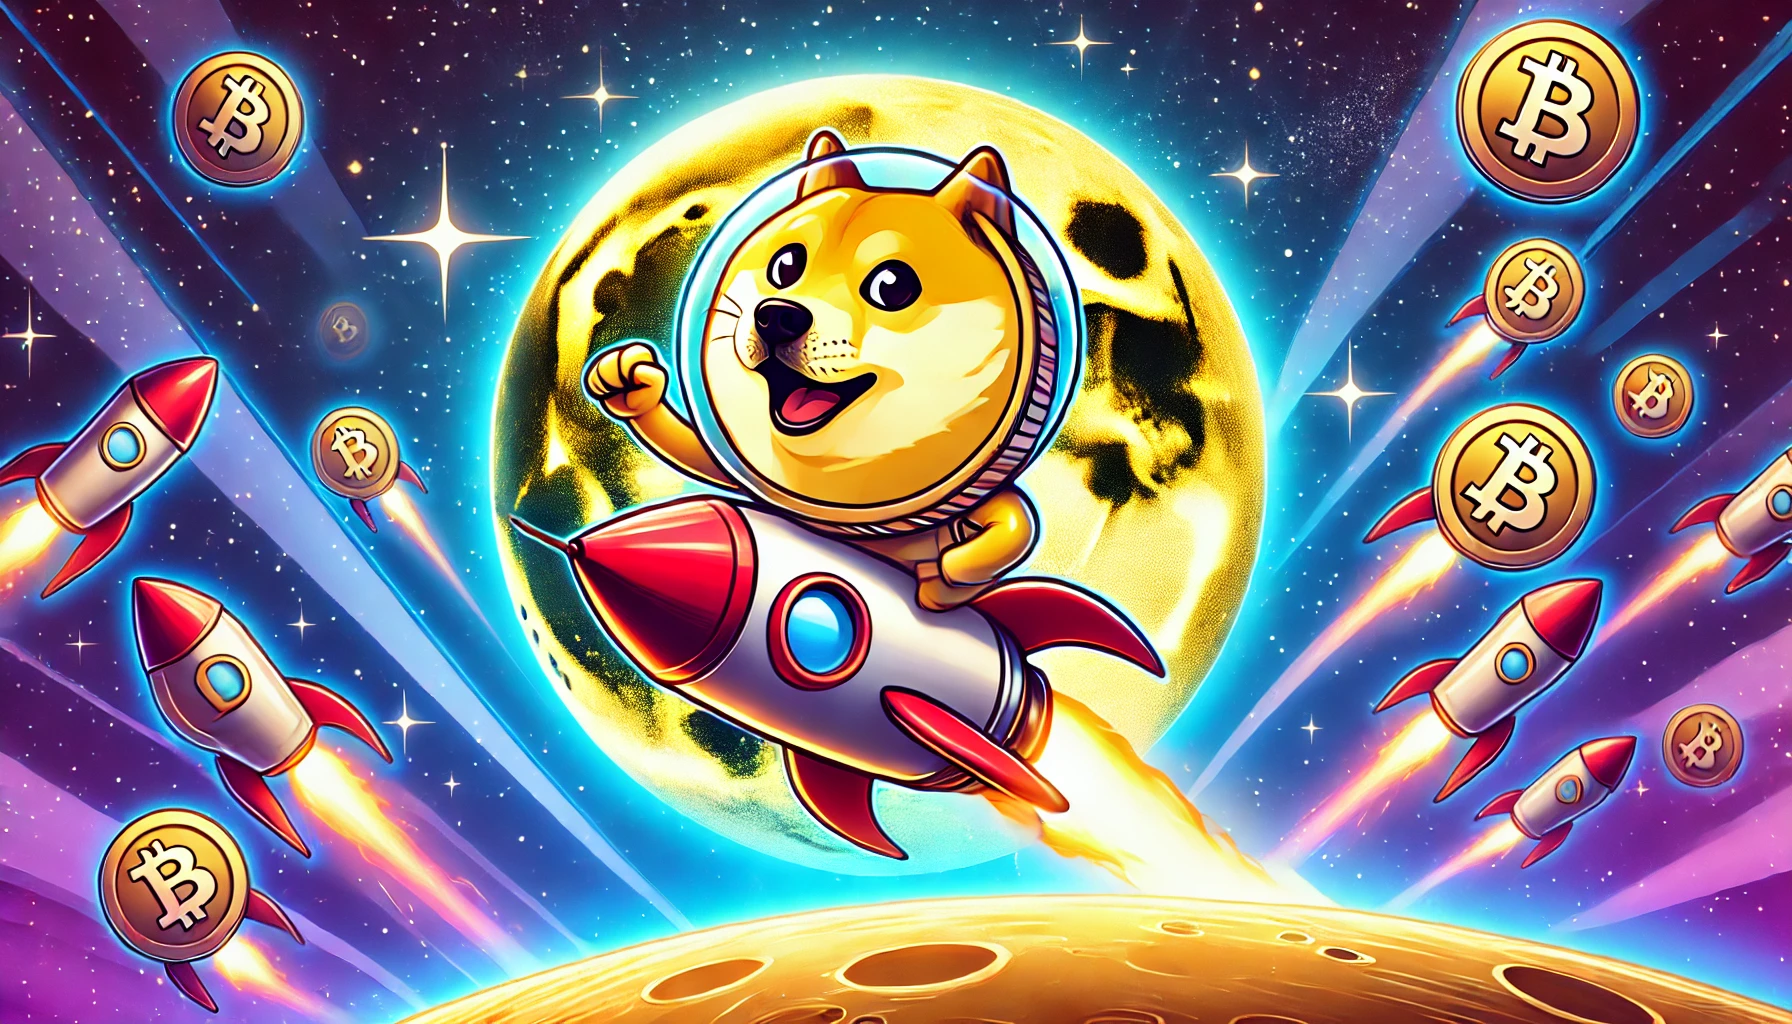 Dogecoin To The Moon? Crypto Analyst Predicts 440% Price Increase